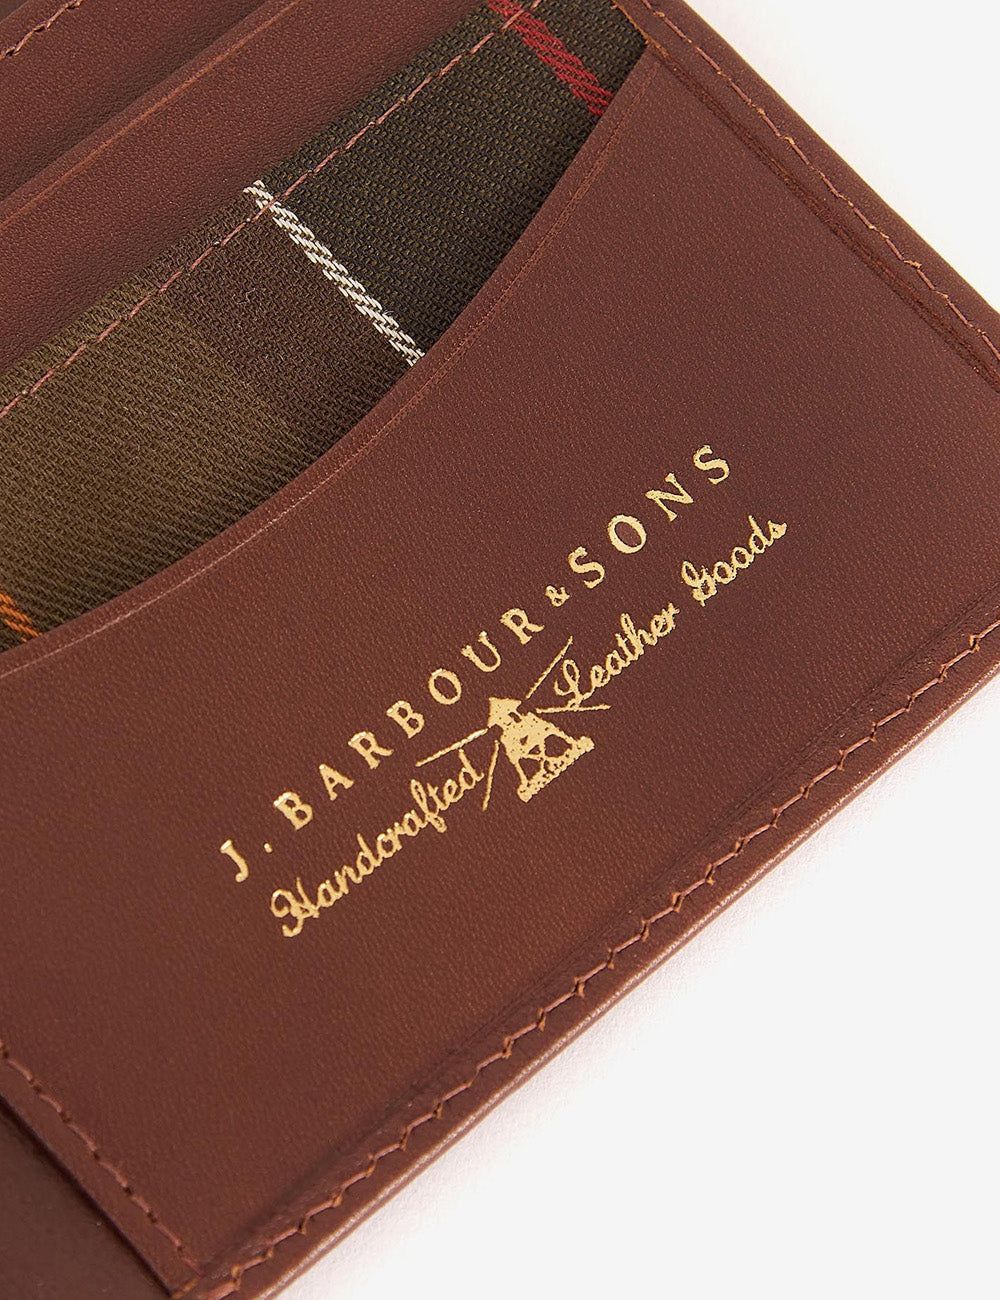 Barbour Colwell Billfold Wallet - Brown/Classic Tartan